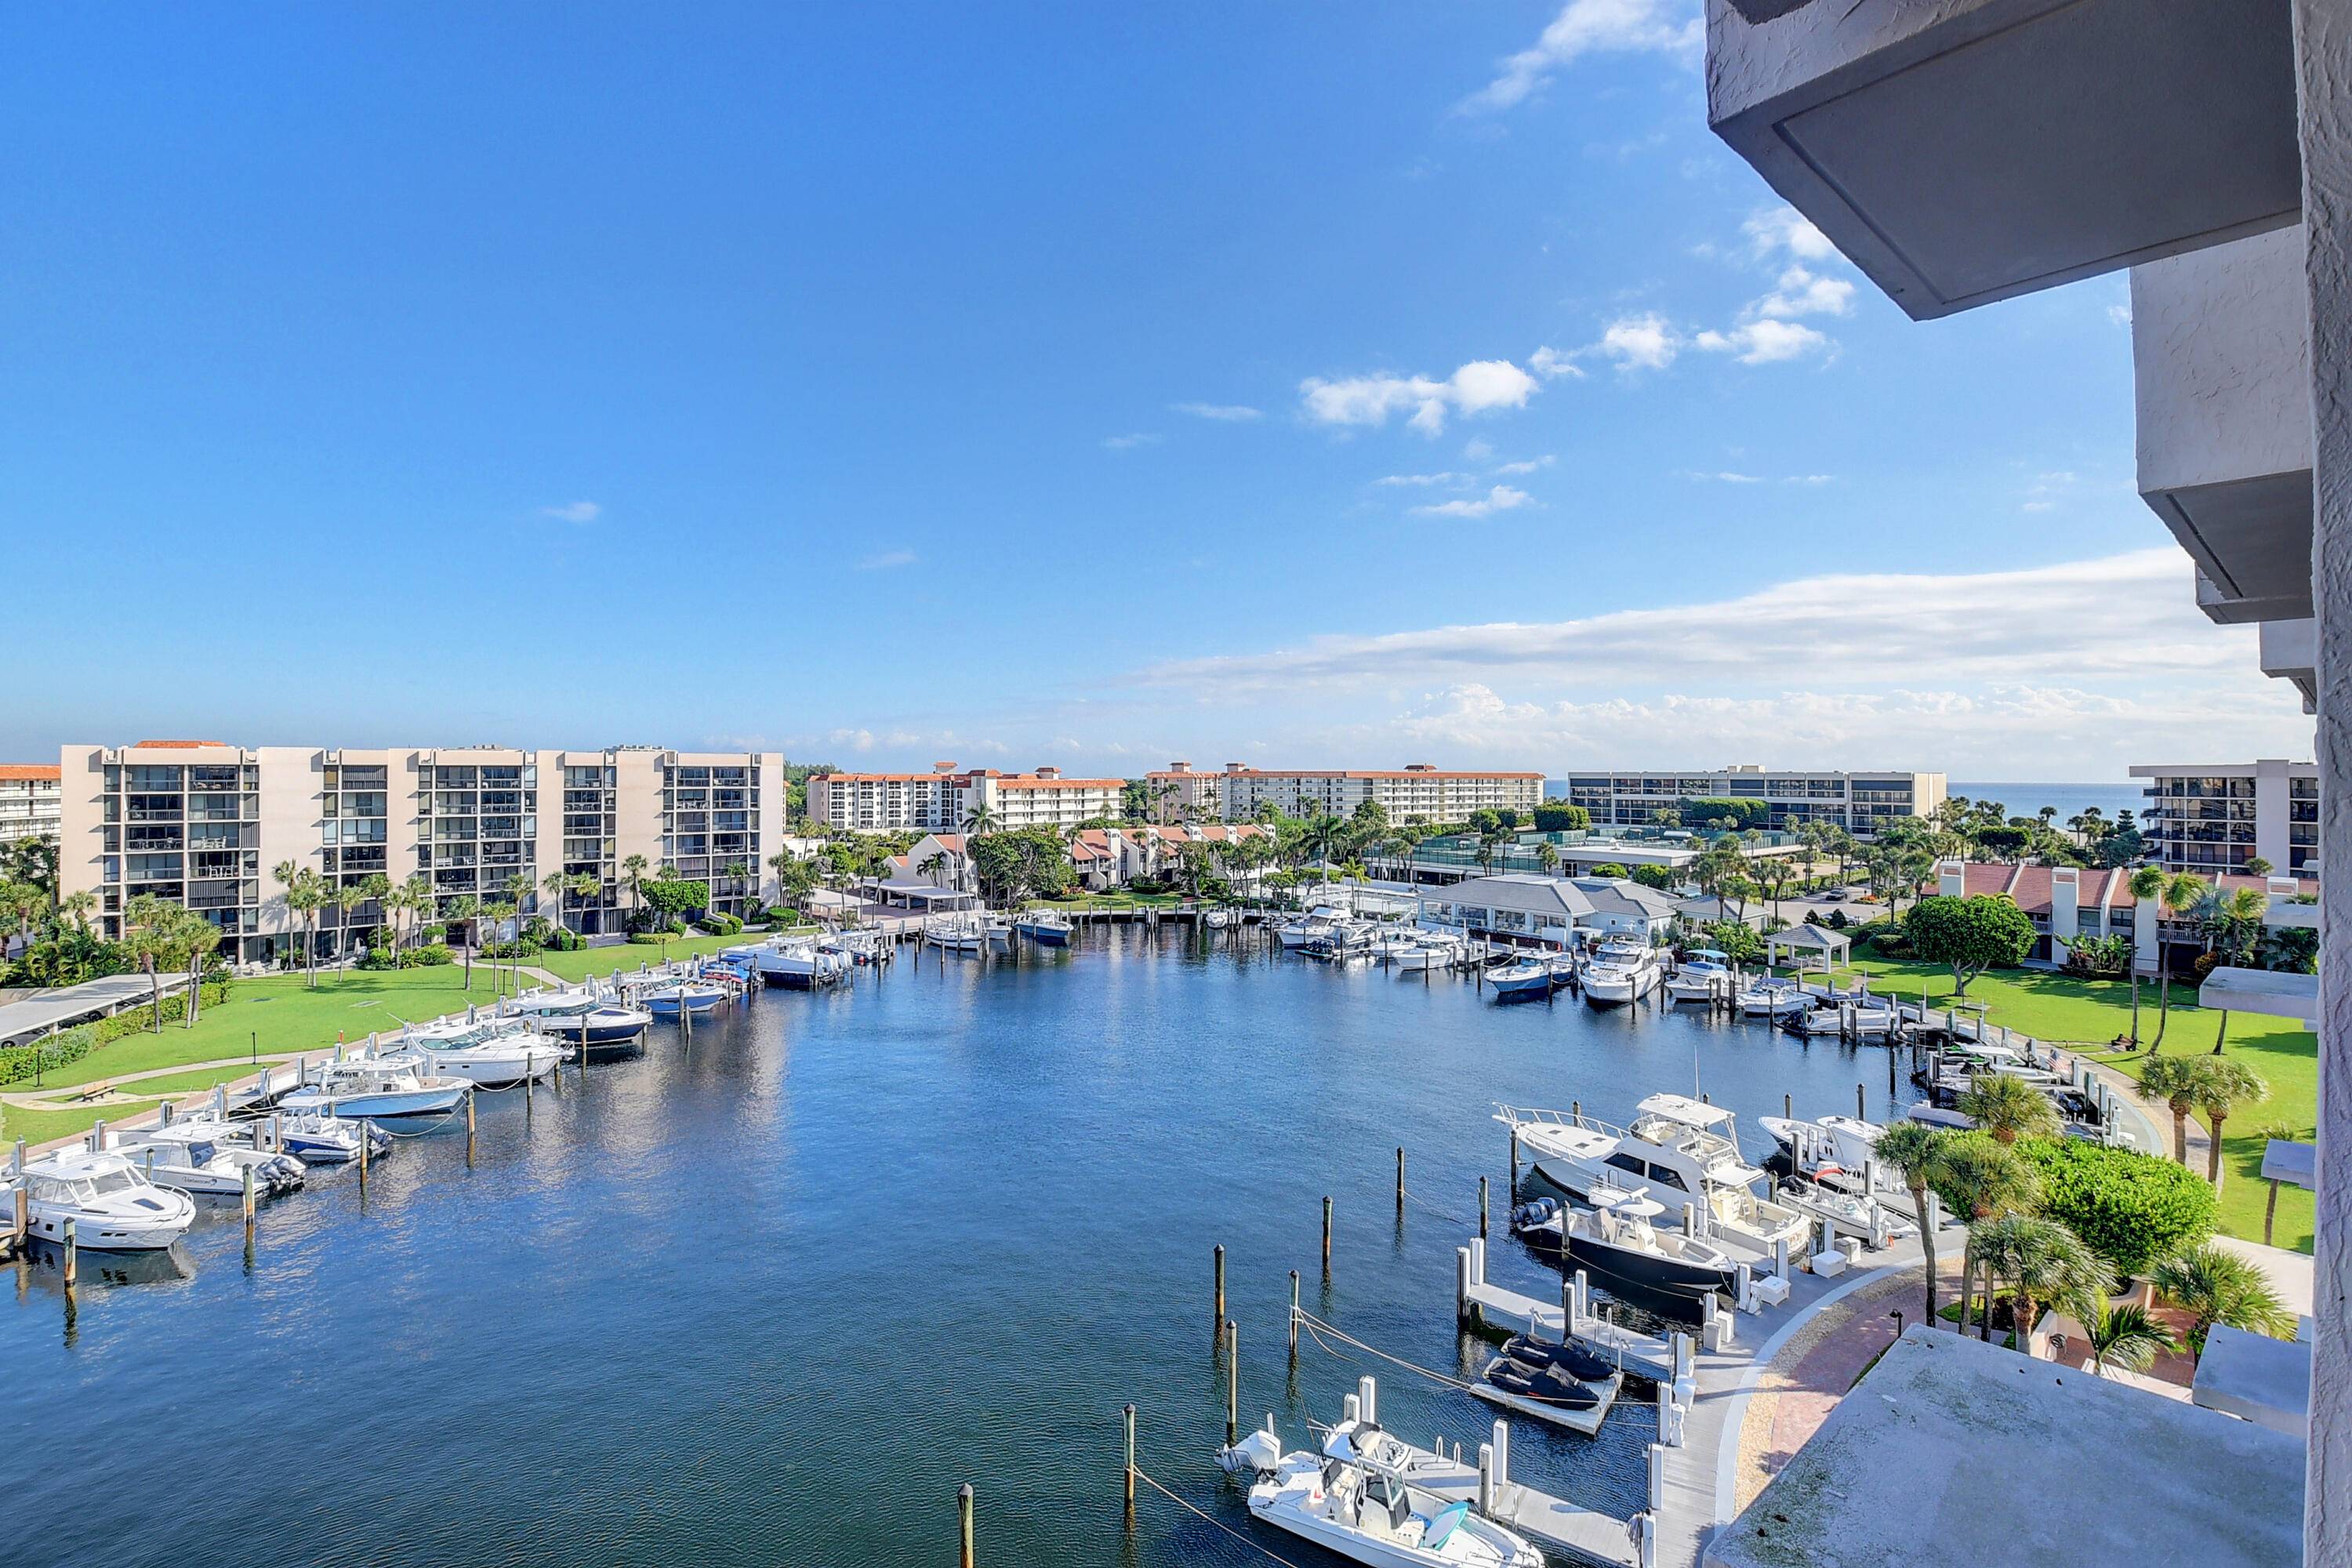 PANORAMIC VIEWS OF THE MARINA, OCEAN AND INTRACOASTAL FROM THIS 7TH FLOOR 2 BEDROOM 2 BATH CONDO OVERLOOKING THE MARINA AND YACHTS LAMINATE FLOORS THROUGHOUT WHITE KITCHEN CABINETS NEW DISHWASHER ...